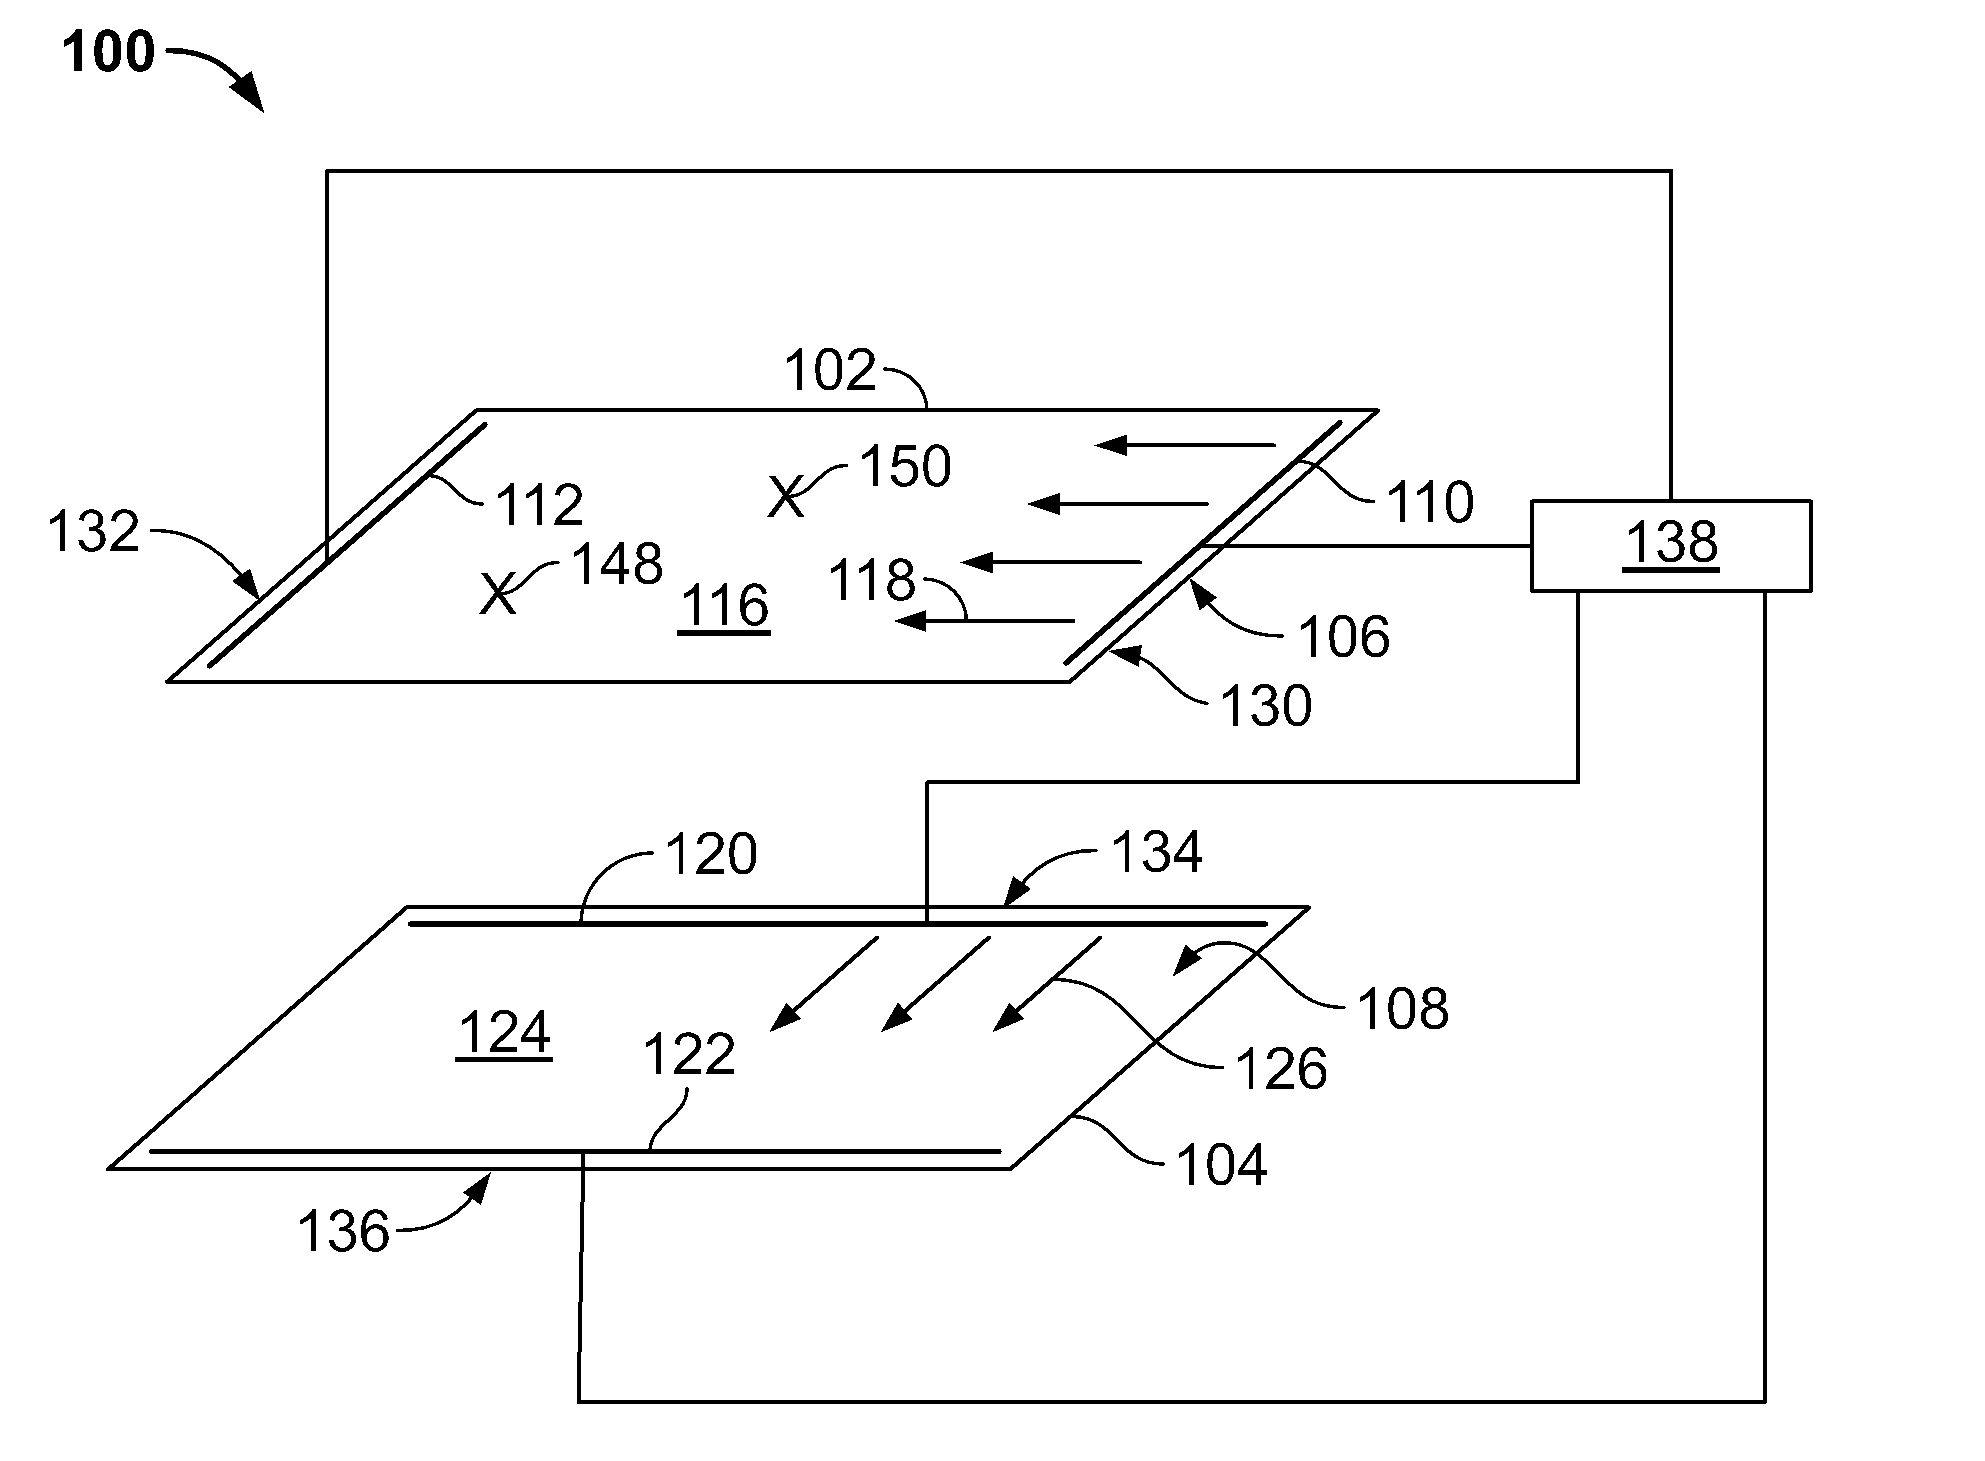 Method and apparatus for detecting two simultaneous touches and gestures on a resistive touchscreen